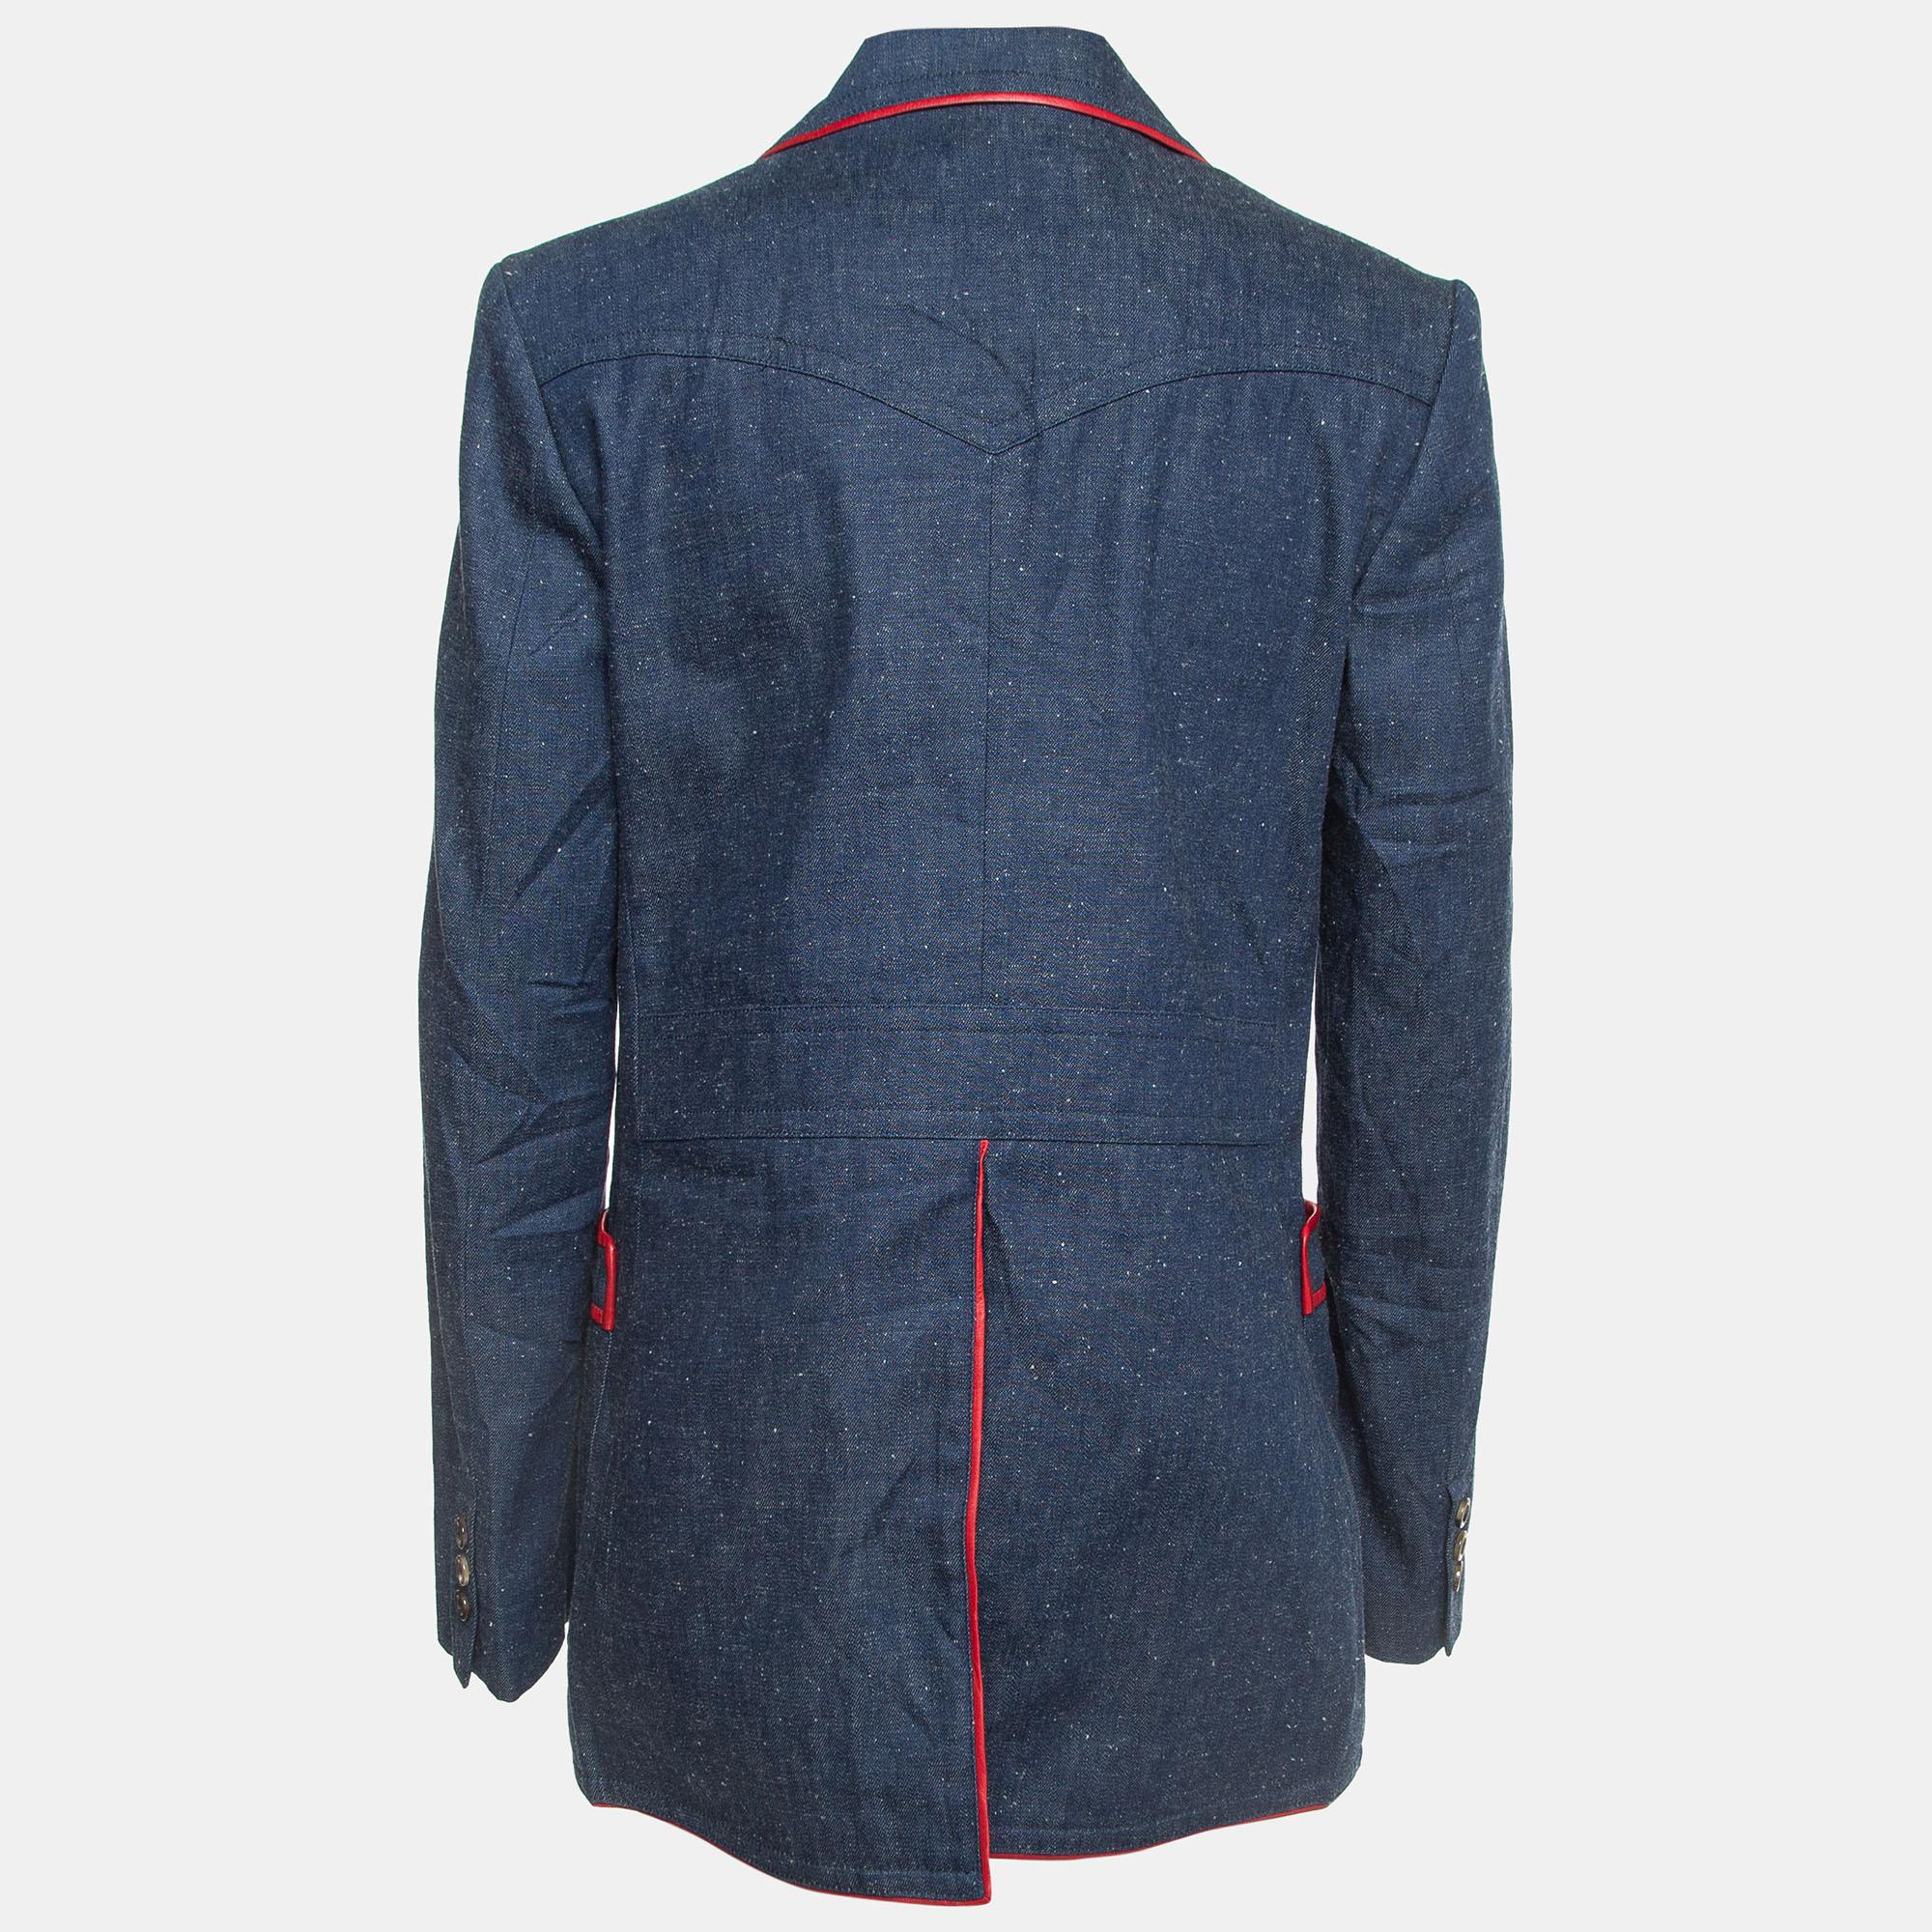 The Gucci blazer embodies sophistication with its sleek design and impeccable craftsmanship. Crafted from high-quality denim, it features luxurious leather trims, adding a touch of elegance to its classic single-breasted silhouette. Ideal for